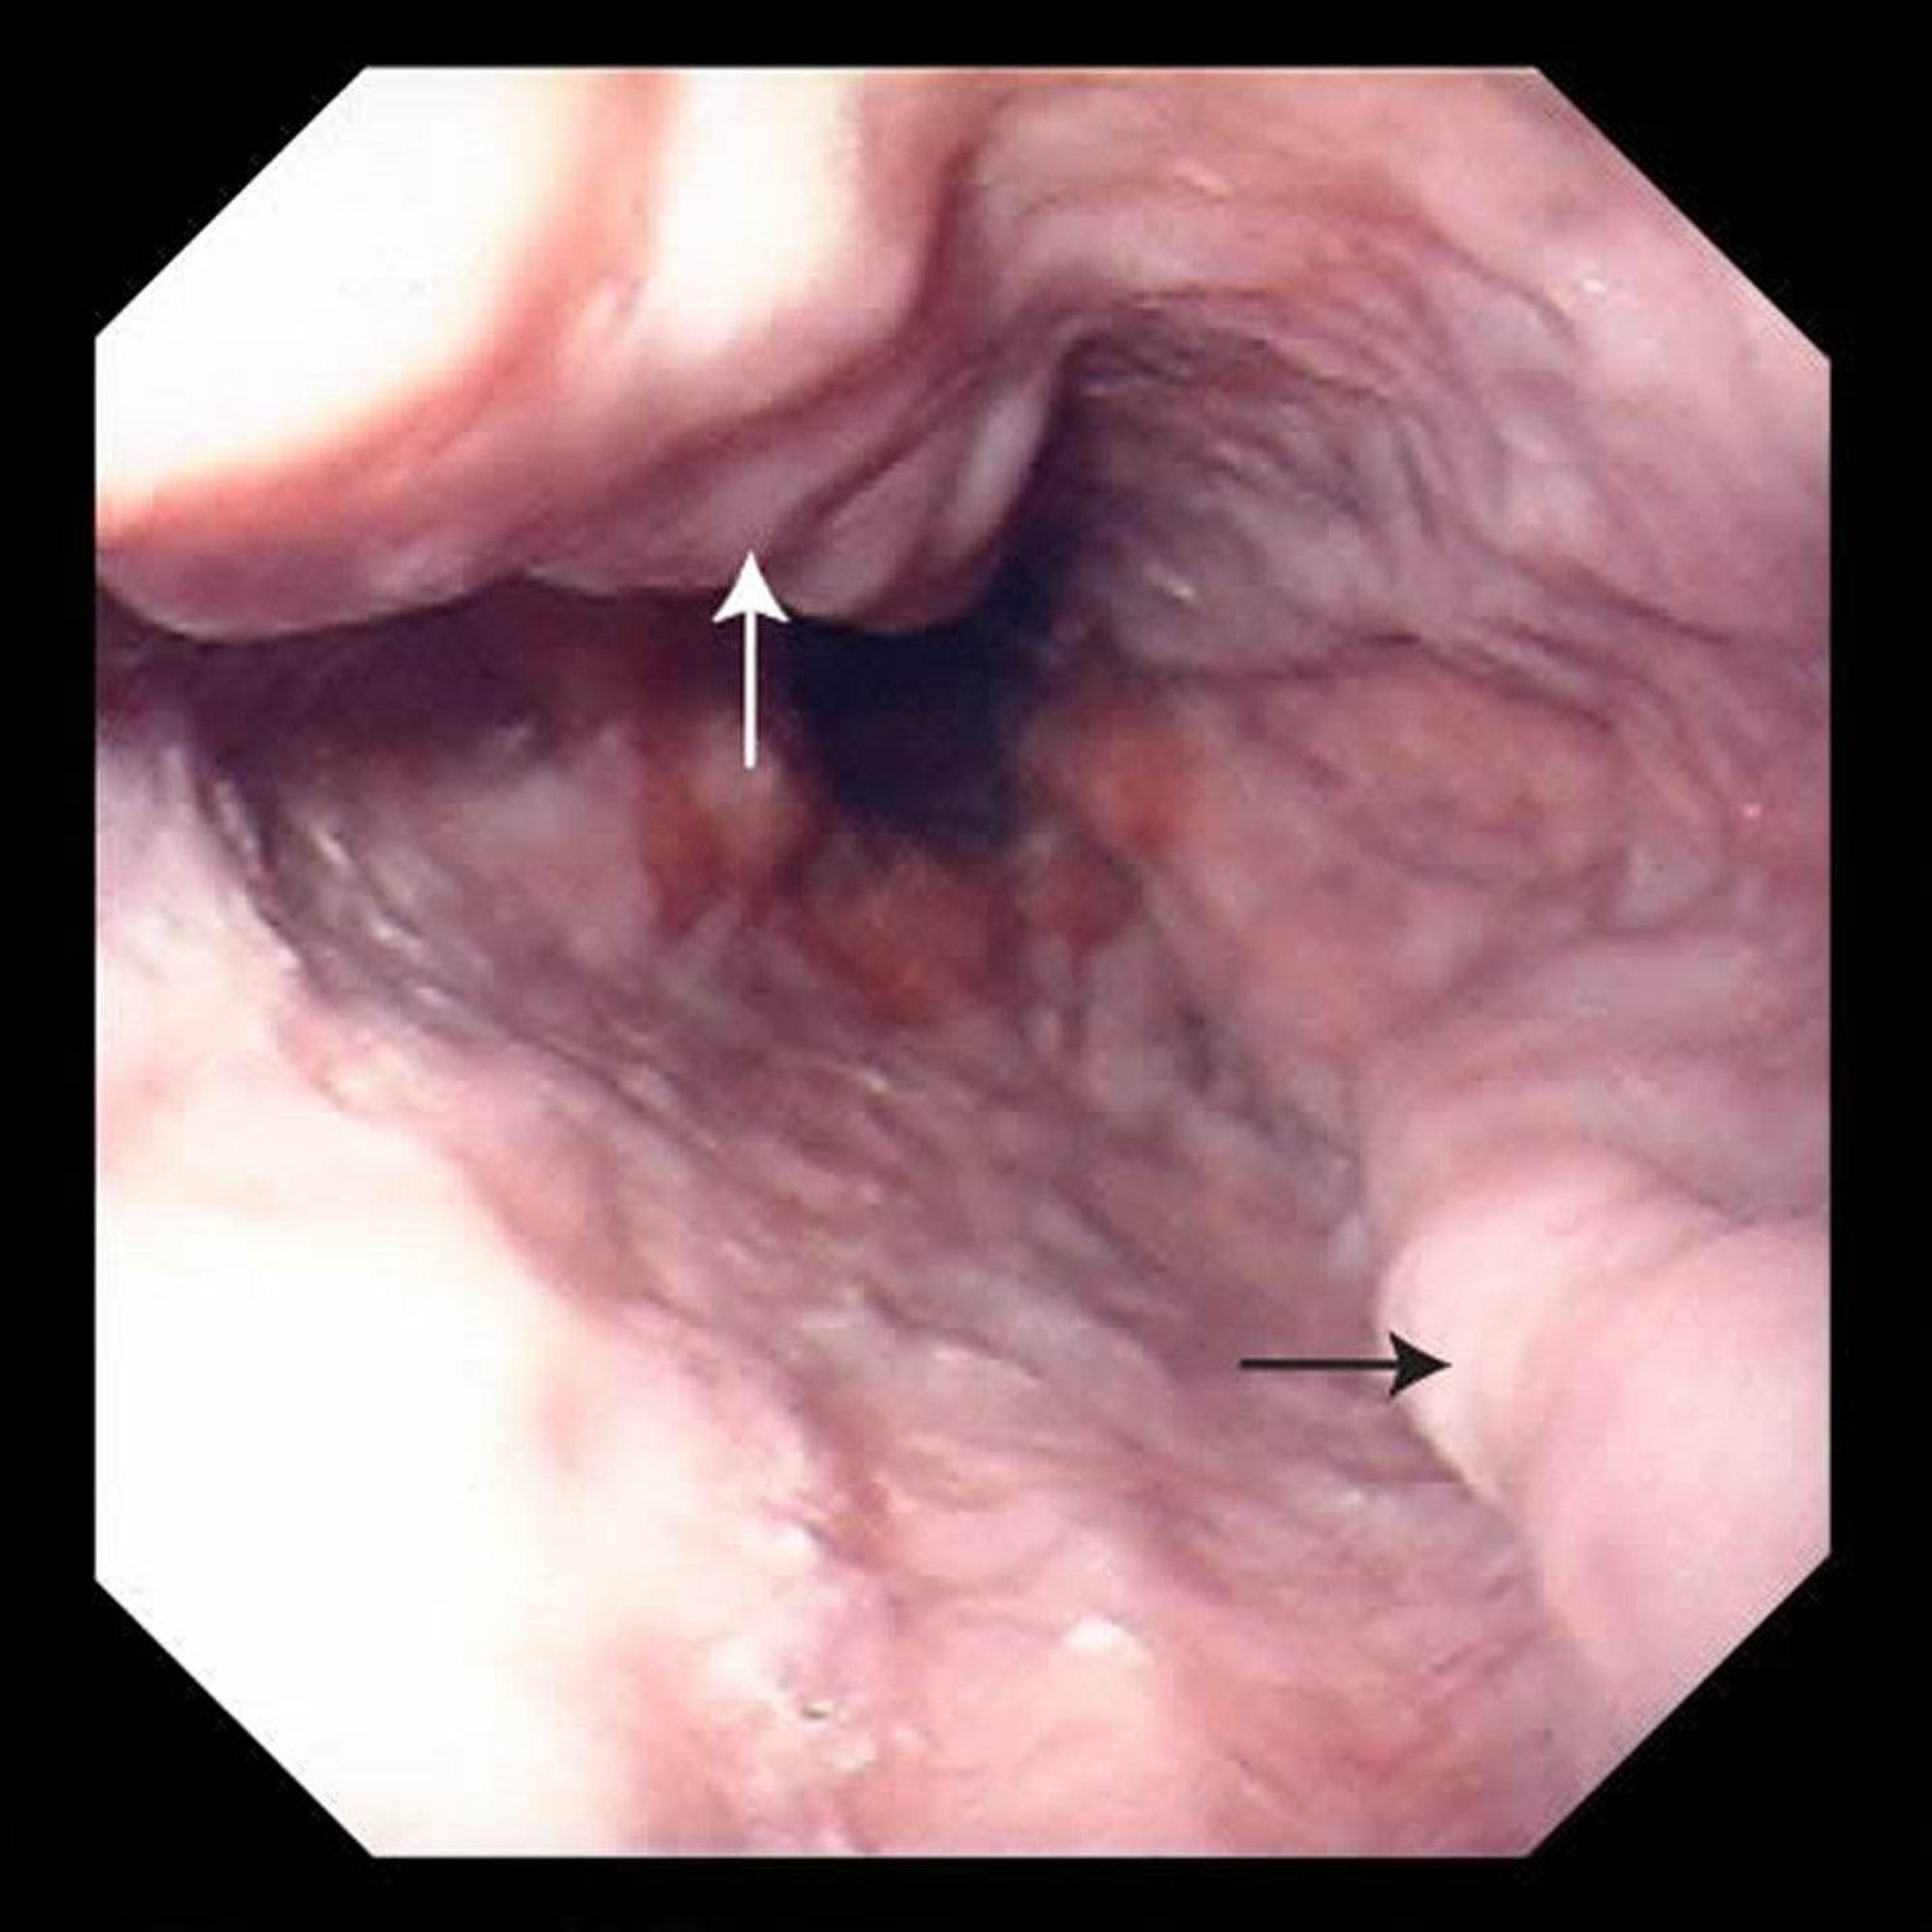 Enlarged Veins in the Esophagus (Esophageal Varices)